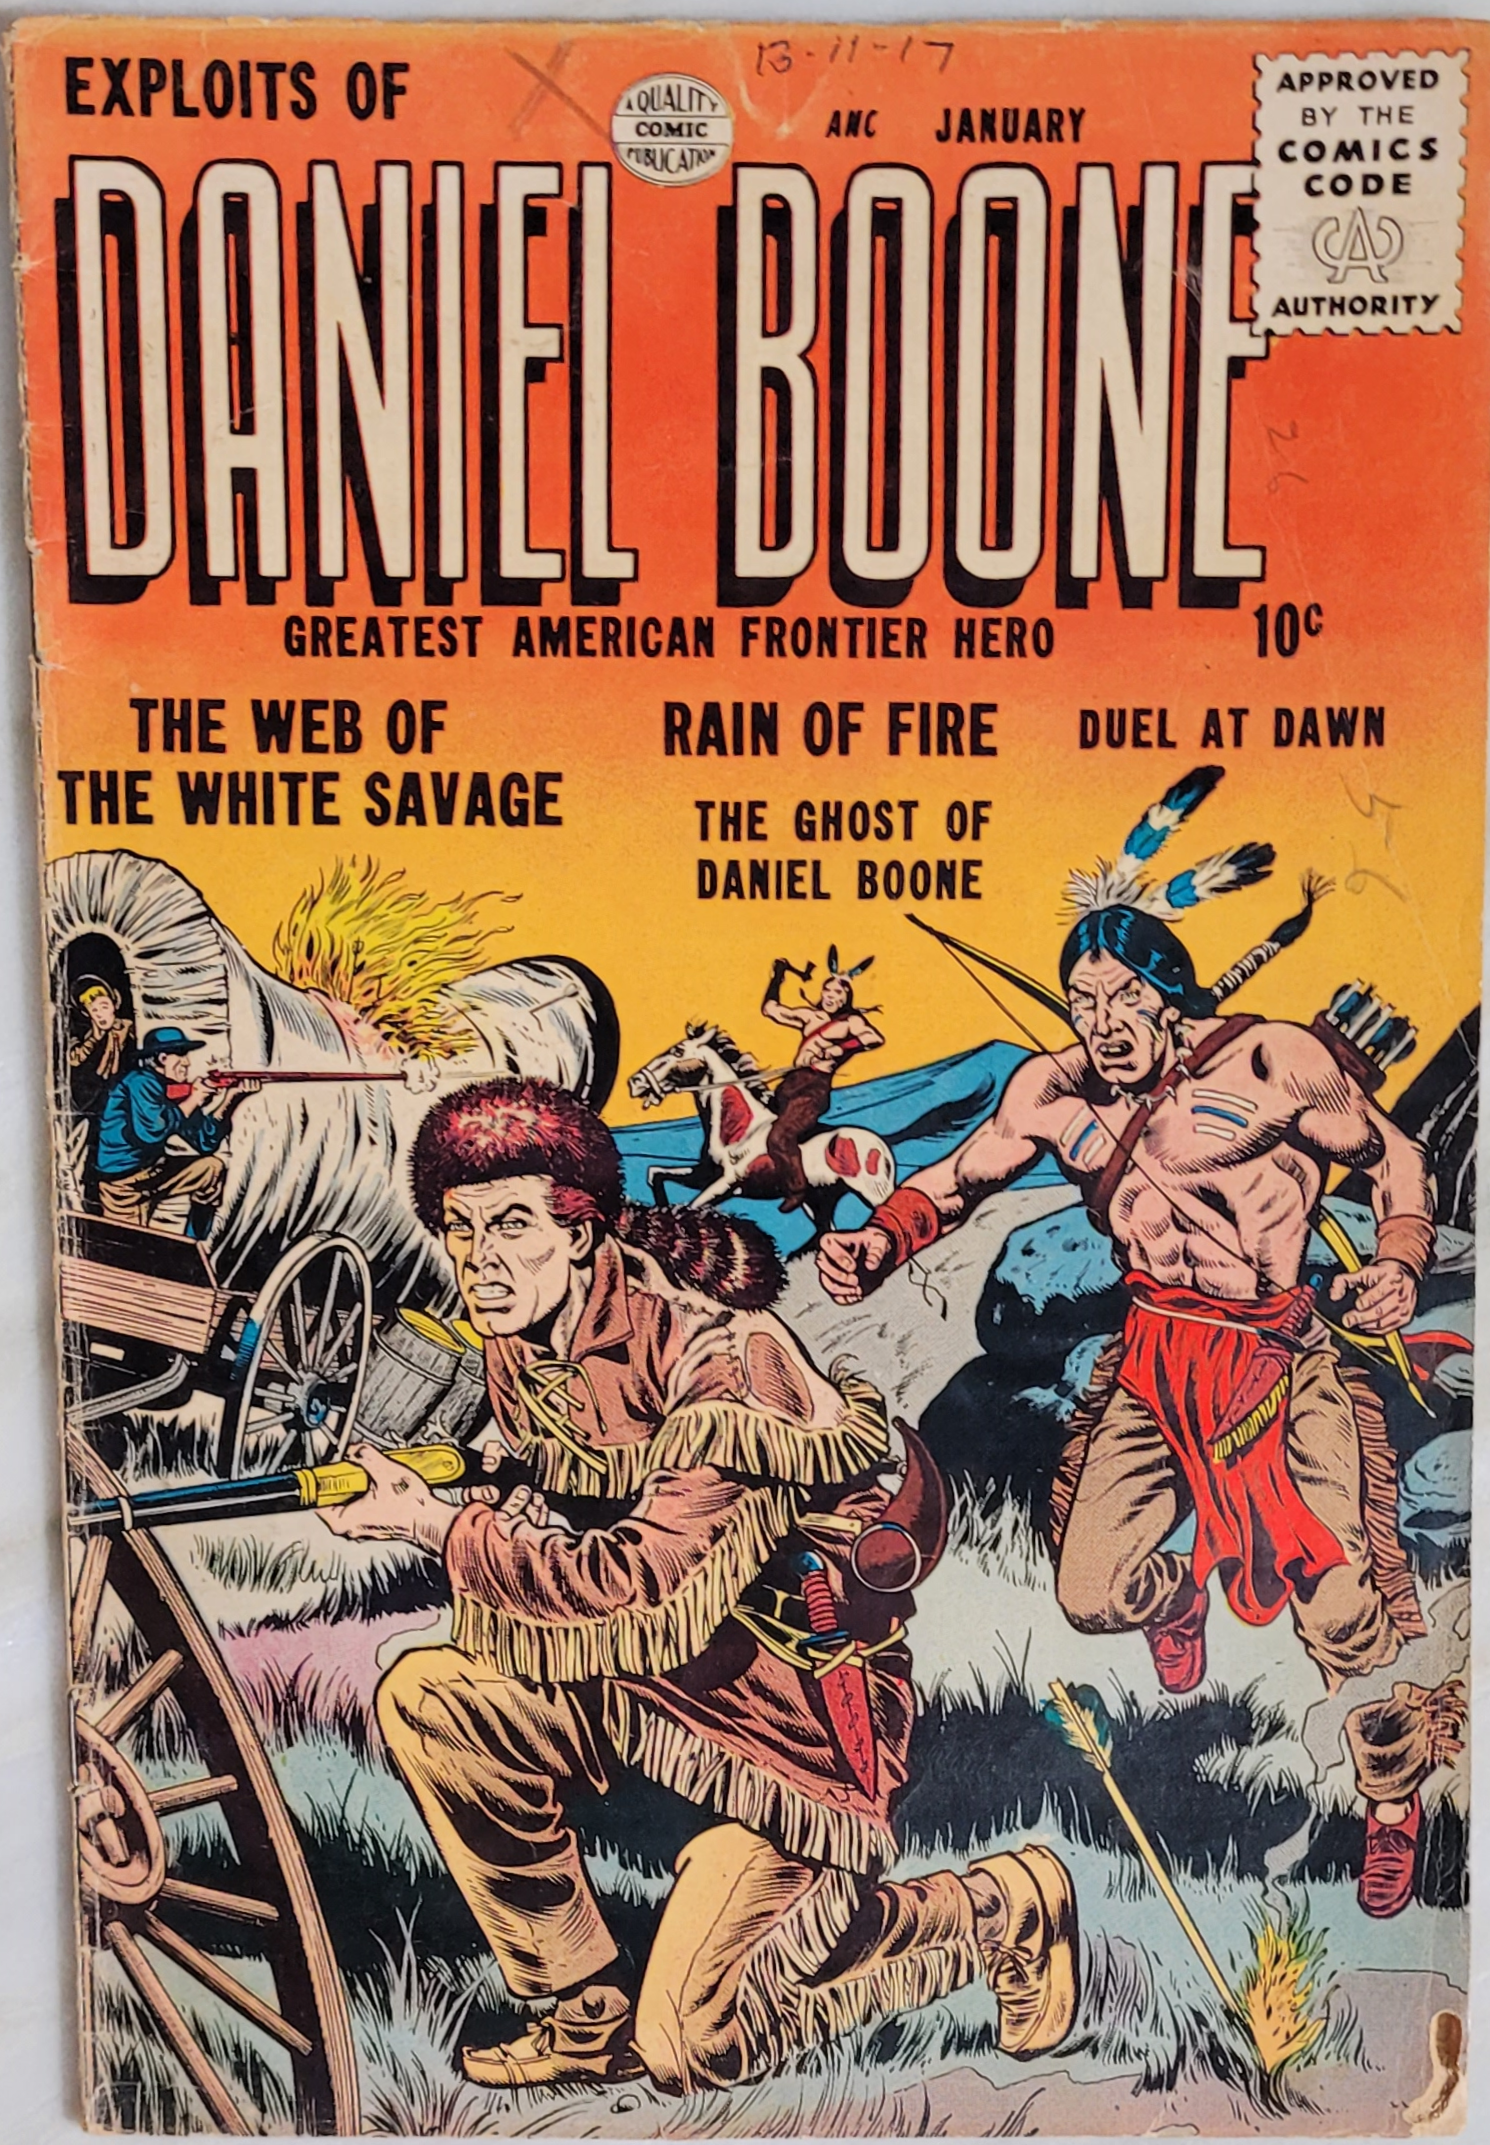 Exploits of Daniel Boone #2 - Front Cover